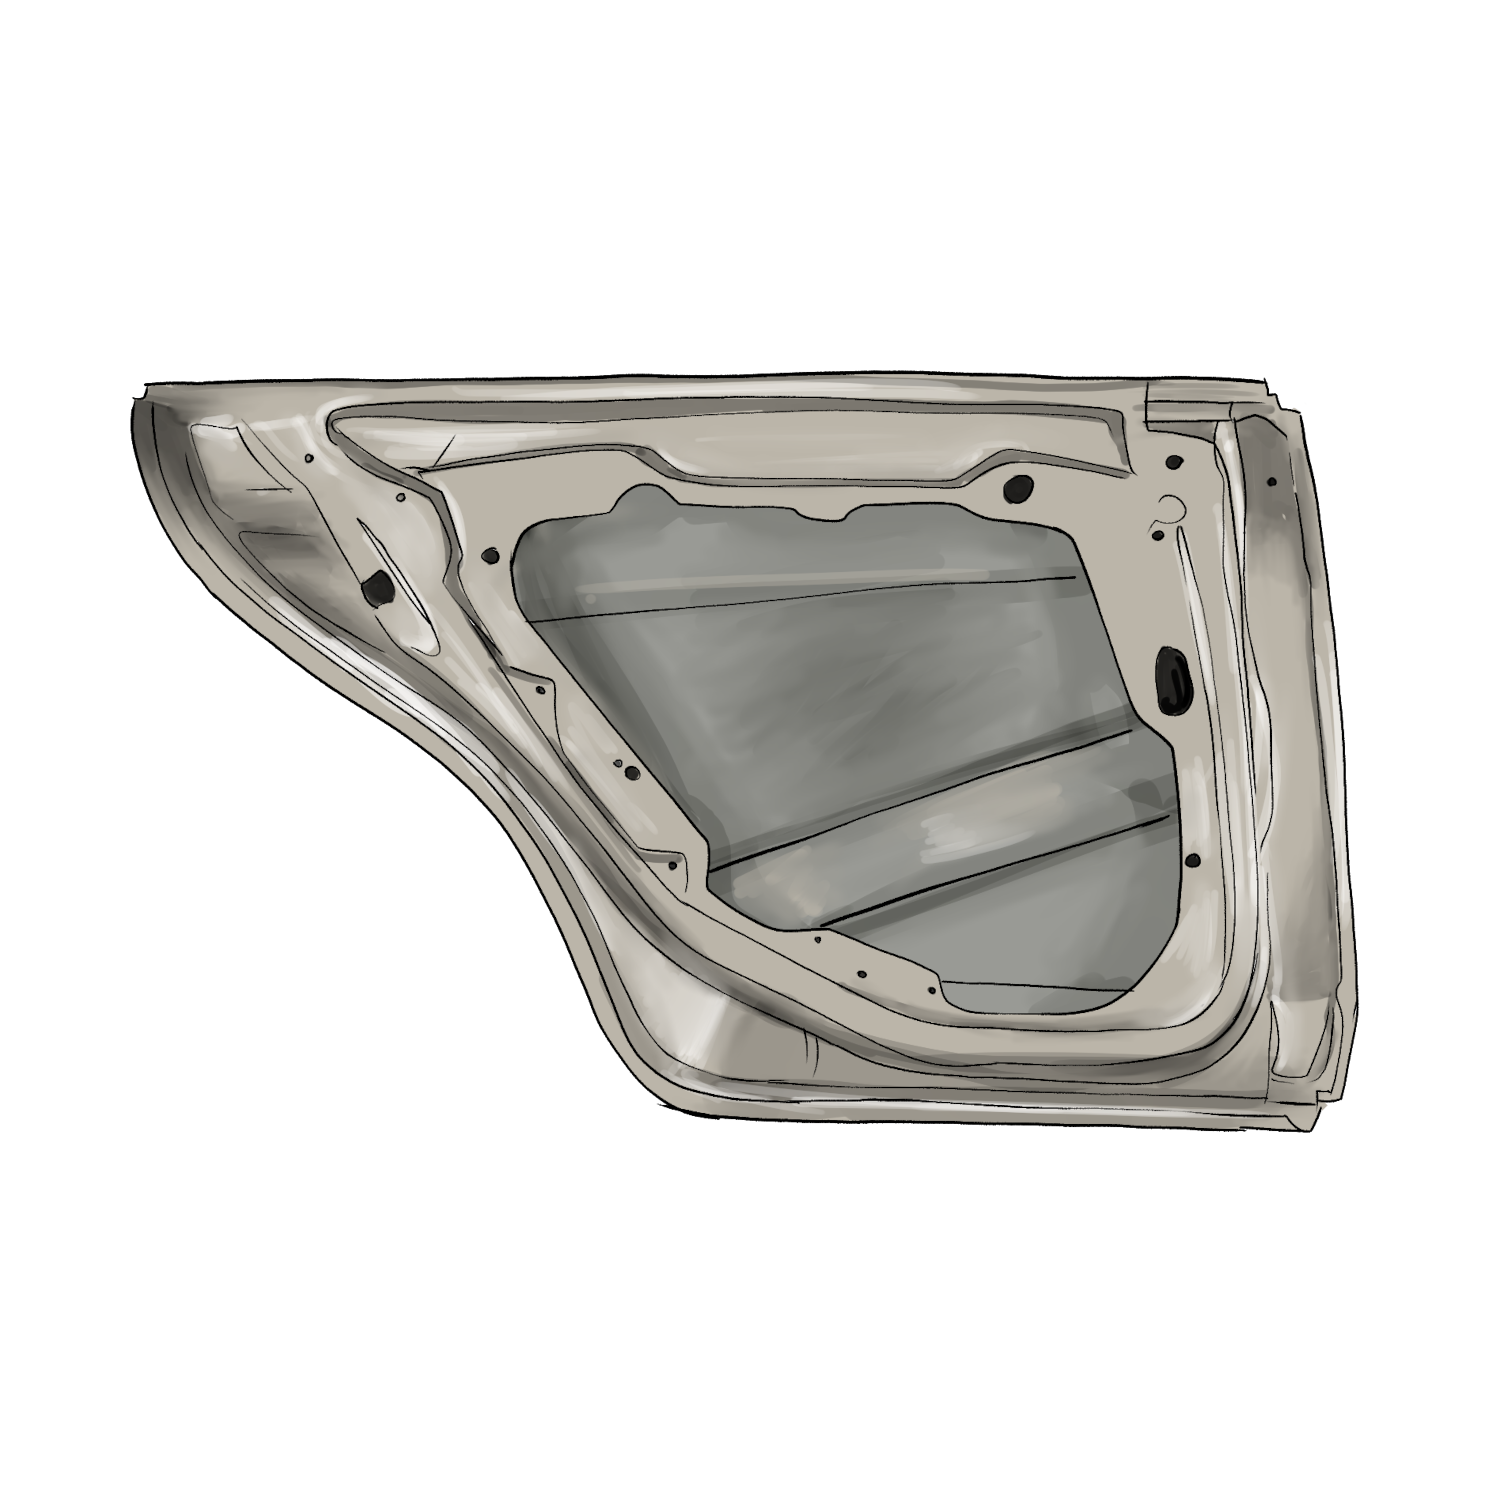  Product image 2 of the product “Door OX5 rear ATH-3 ”